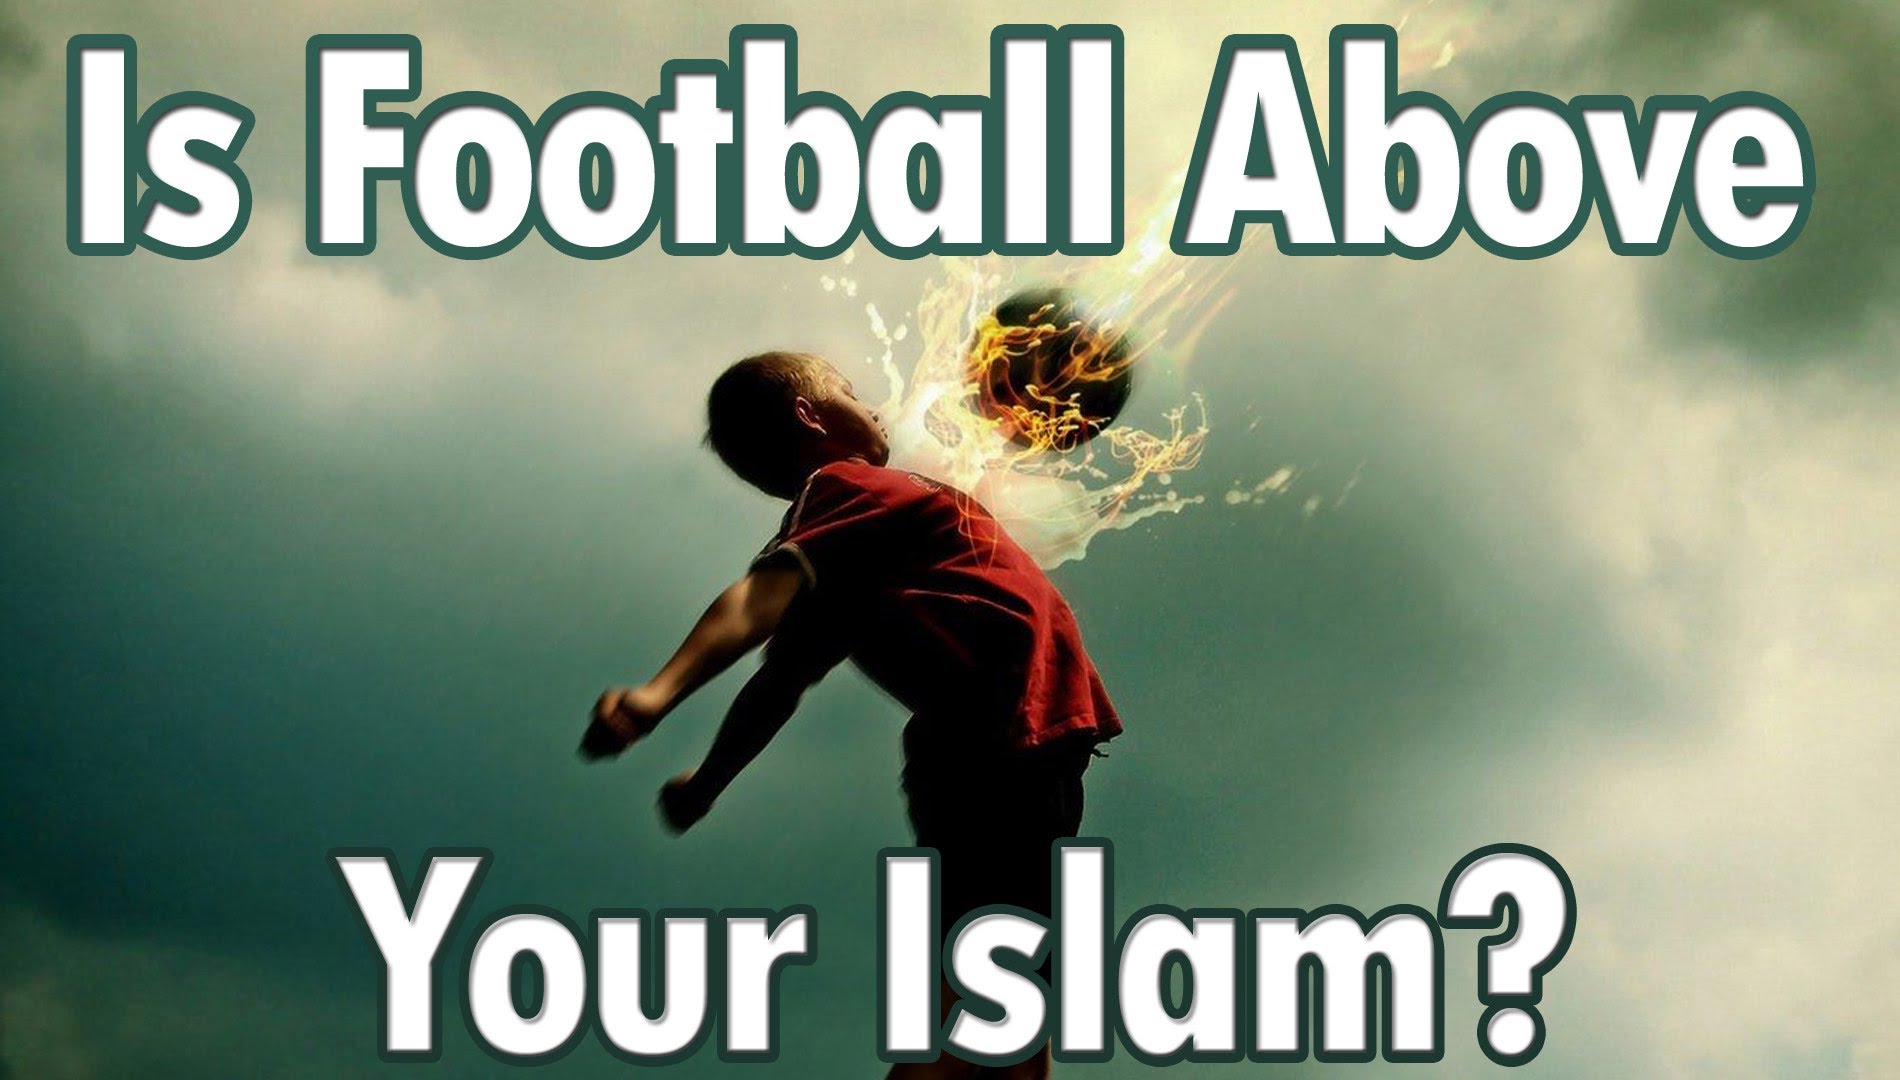 Is Football Above your Deen? Islamic Reminder ᴴᴰ